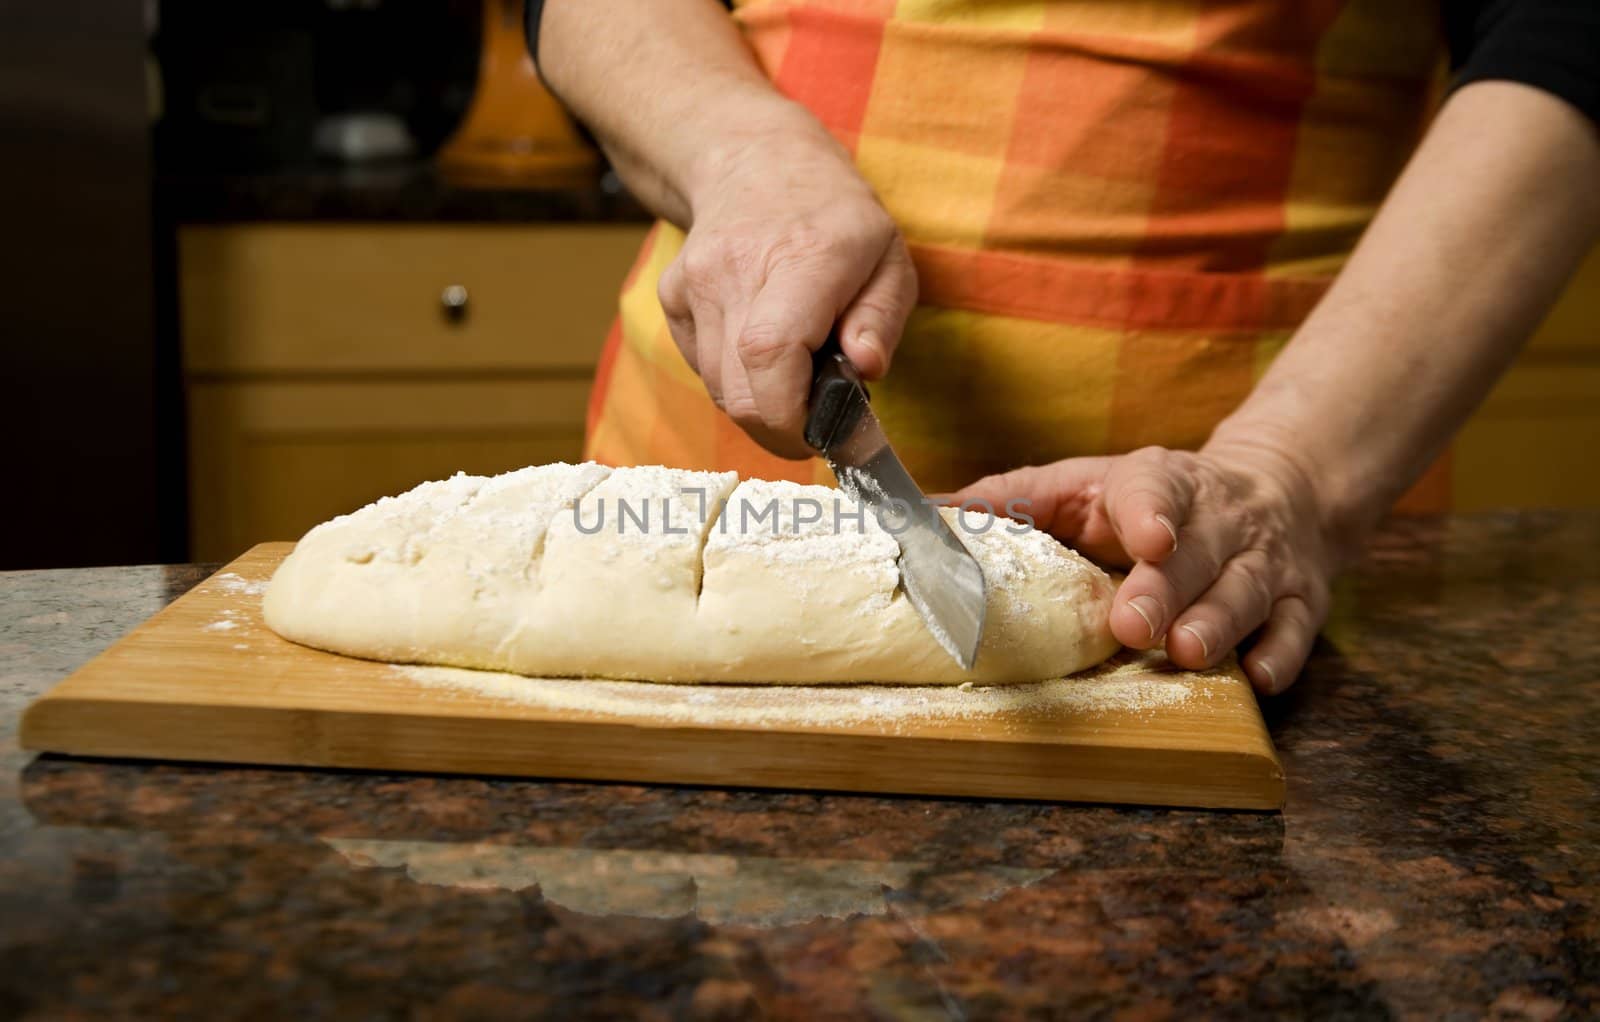 Adding cut to unbaked bread dough by Creatista